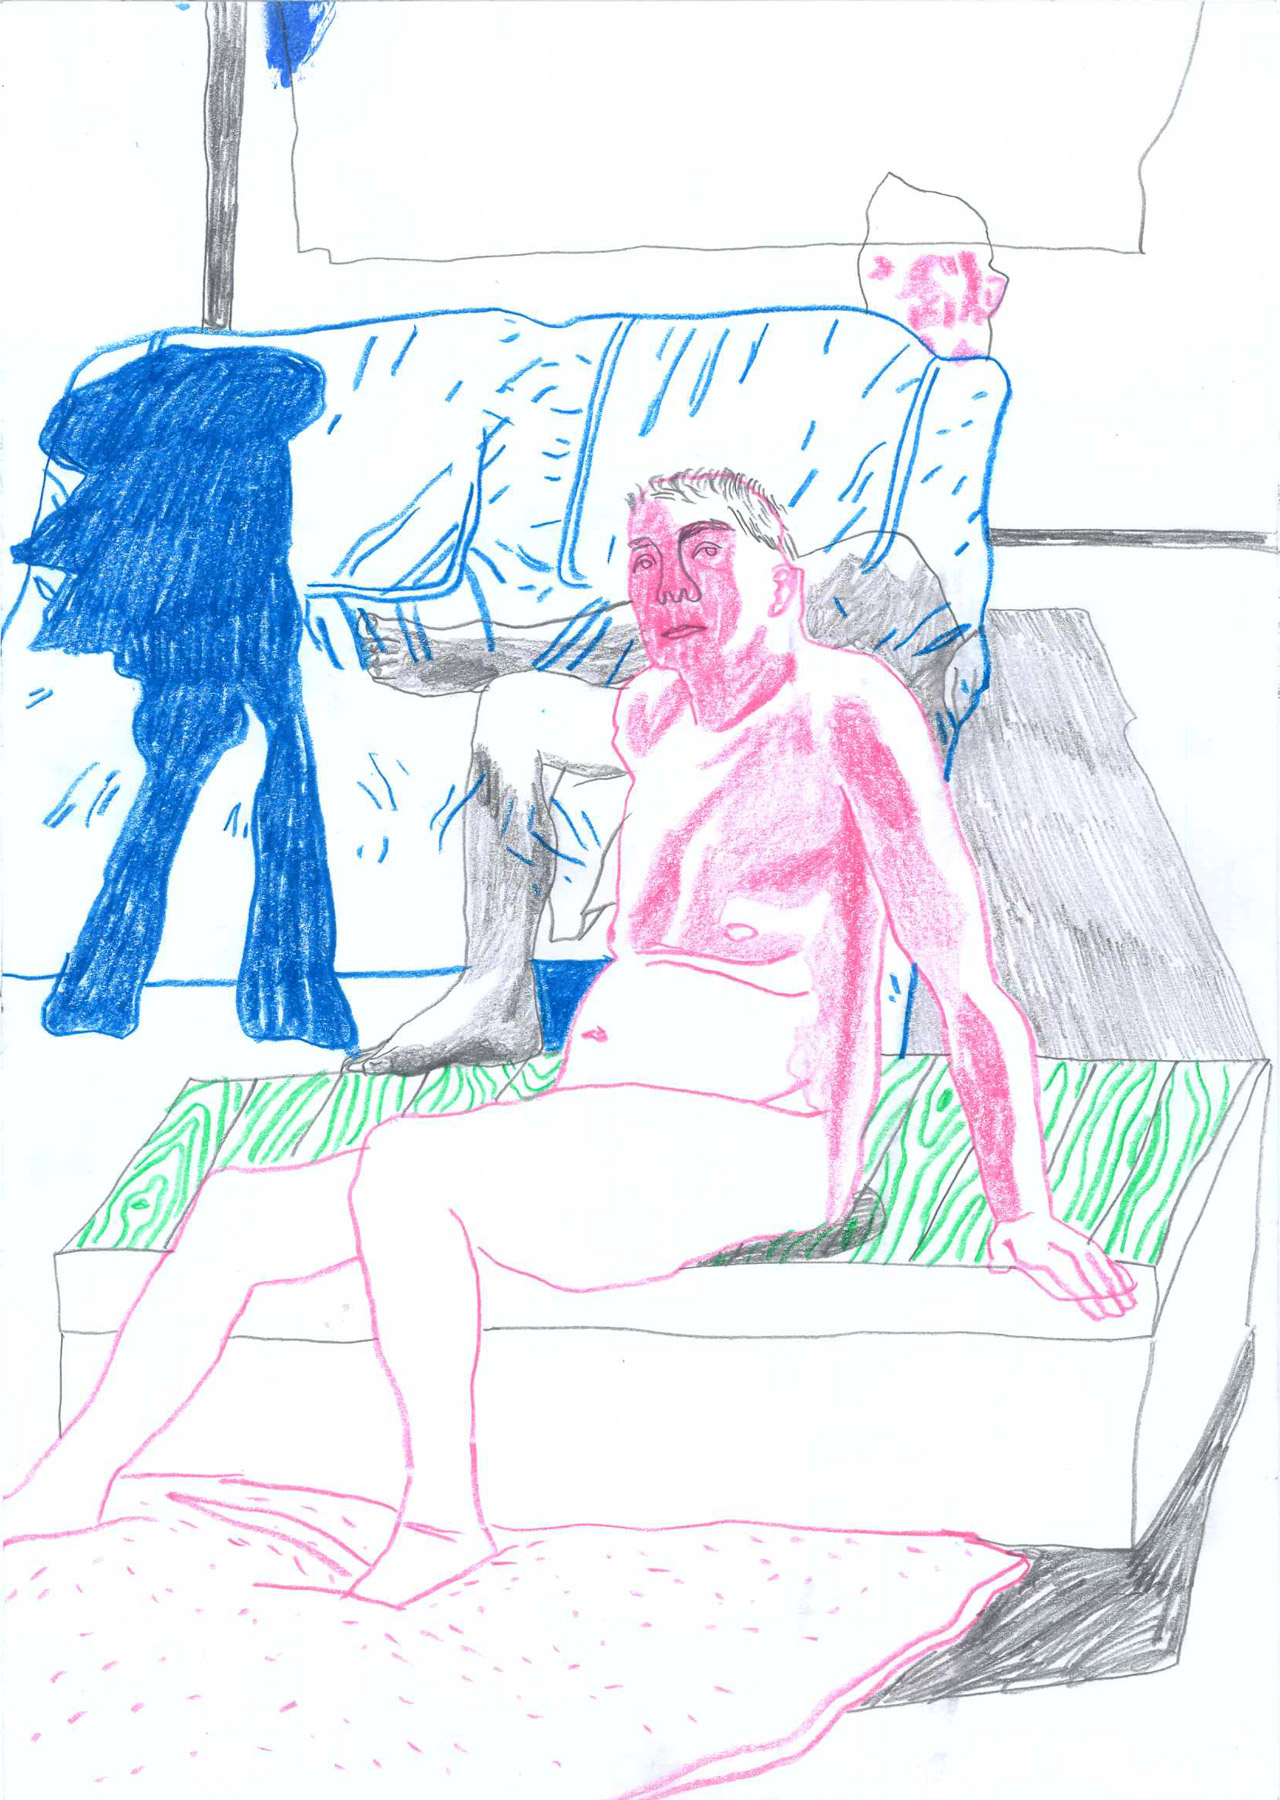 Man and Sofa 2, colored pencil on paper, 29 x 21 cm, 2019, Lisa Breyer